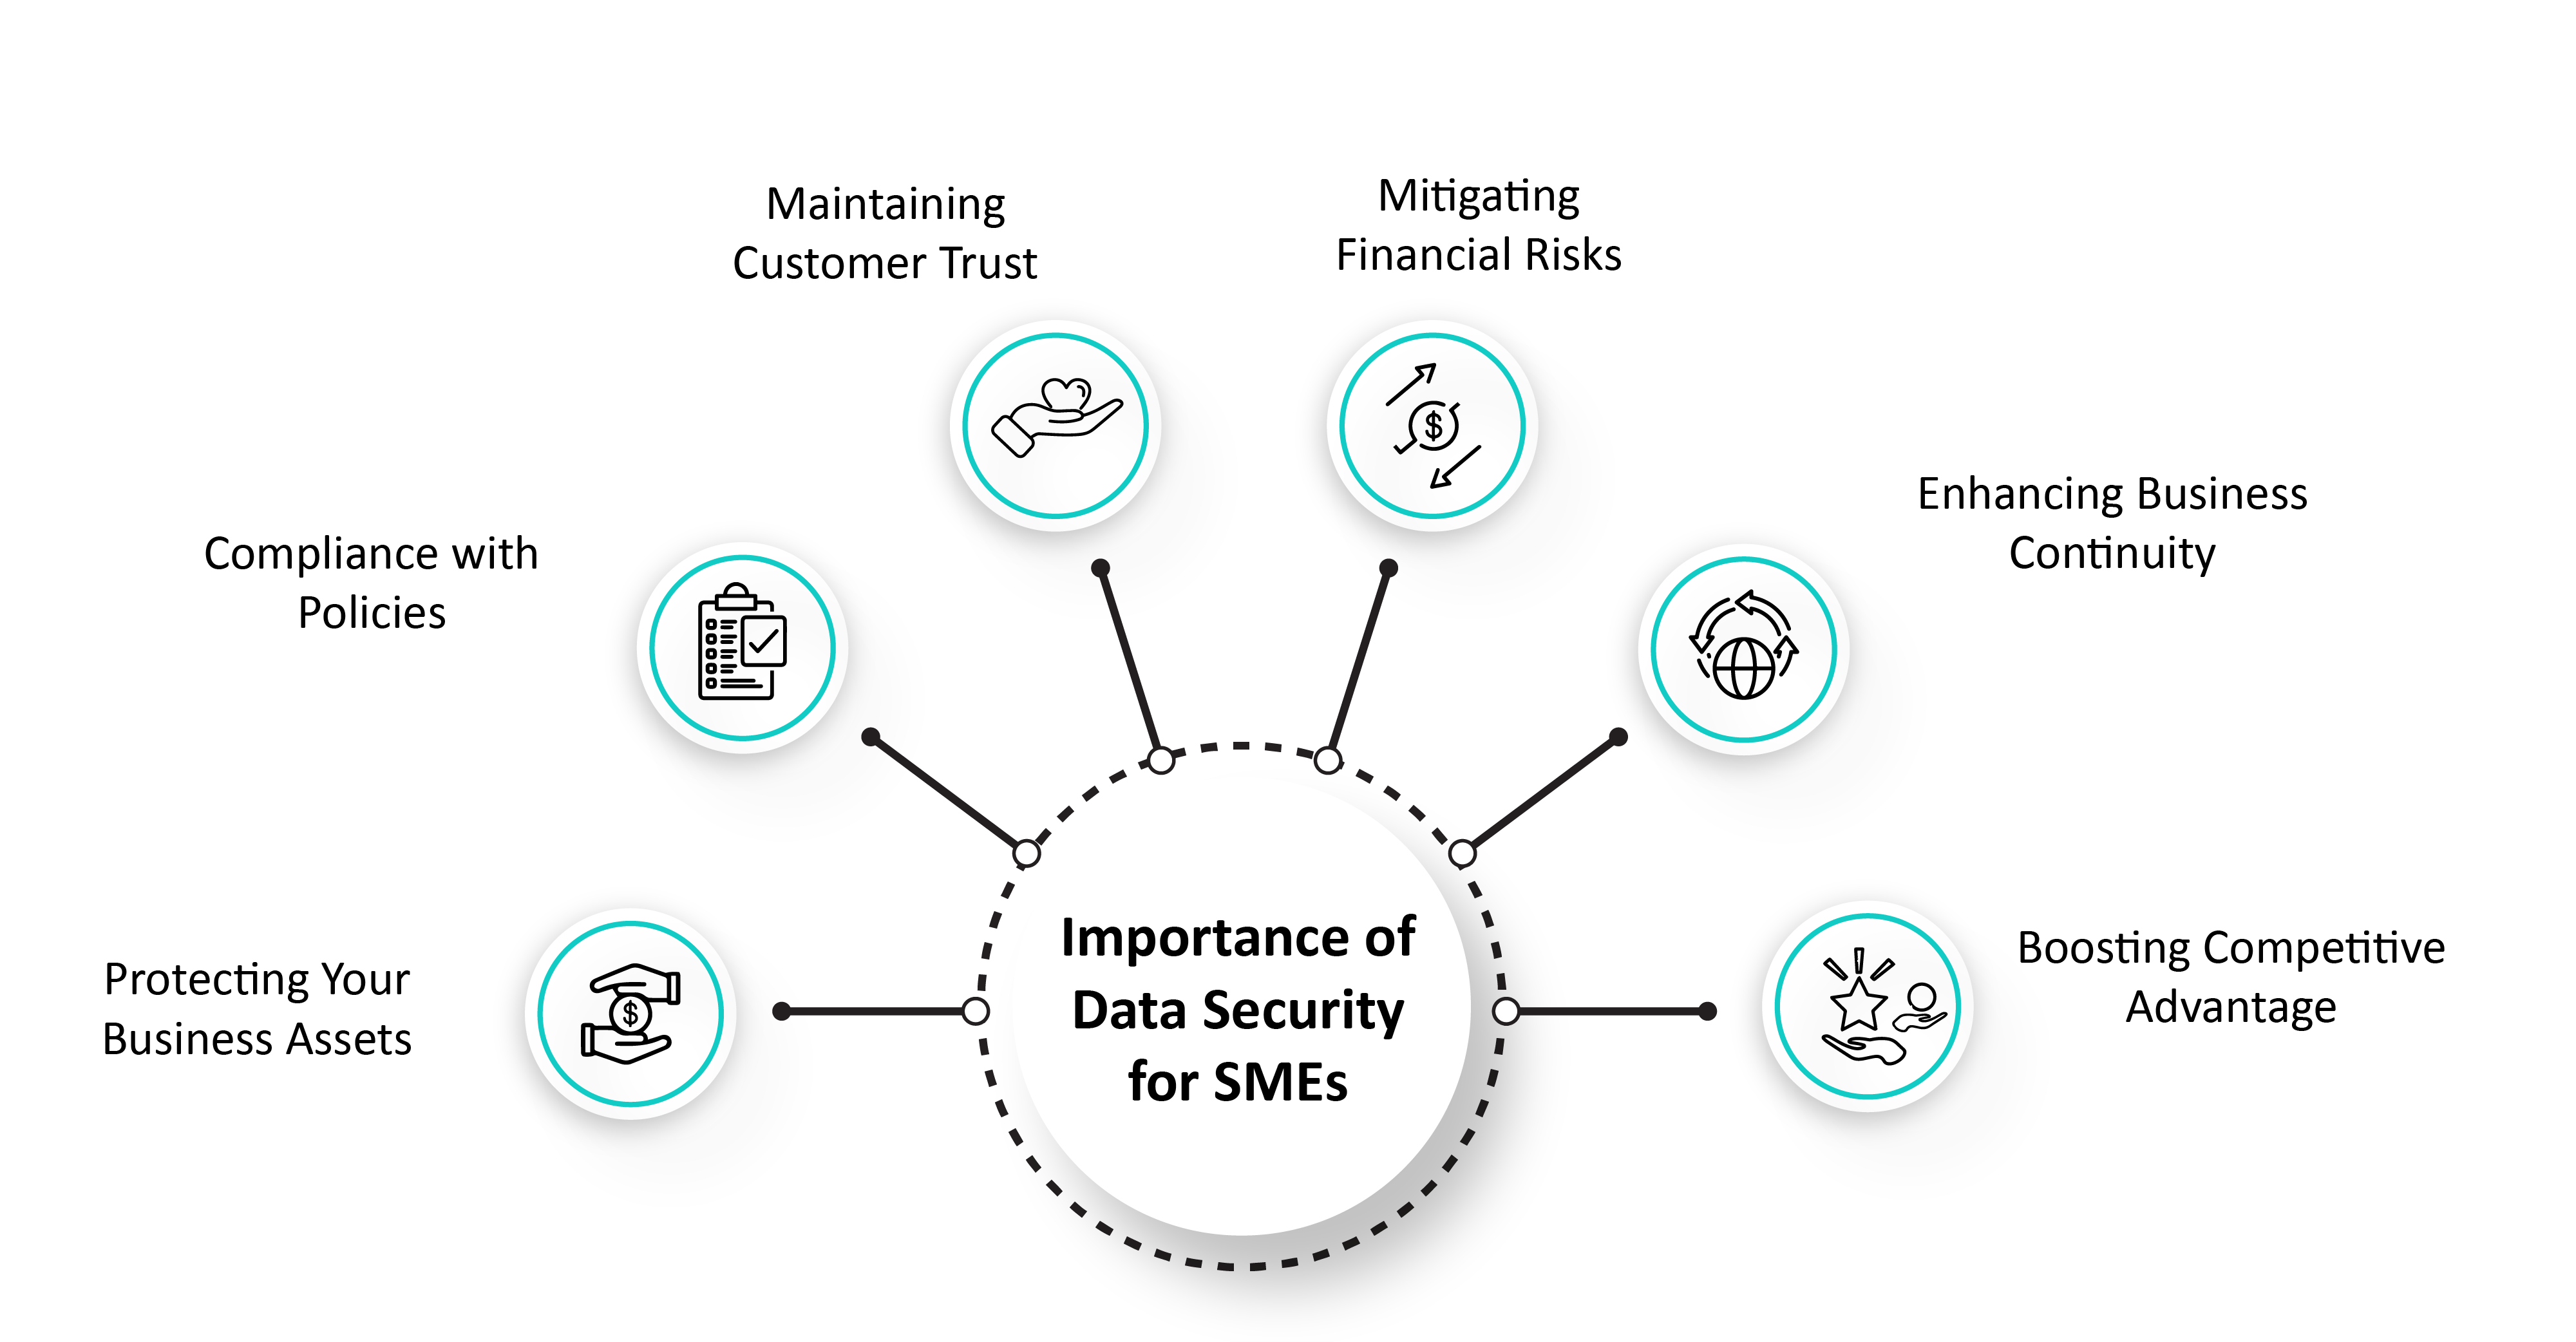 Importance of Data Security for SMEs